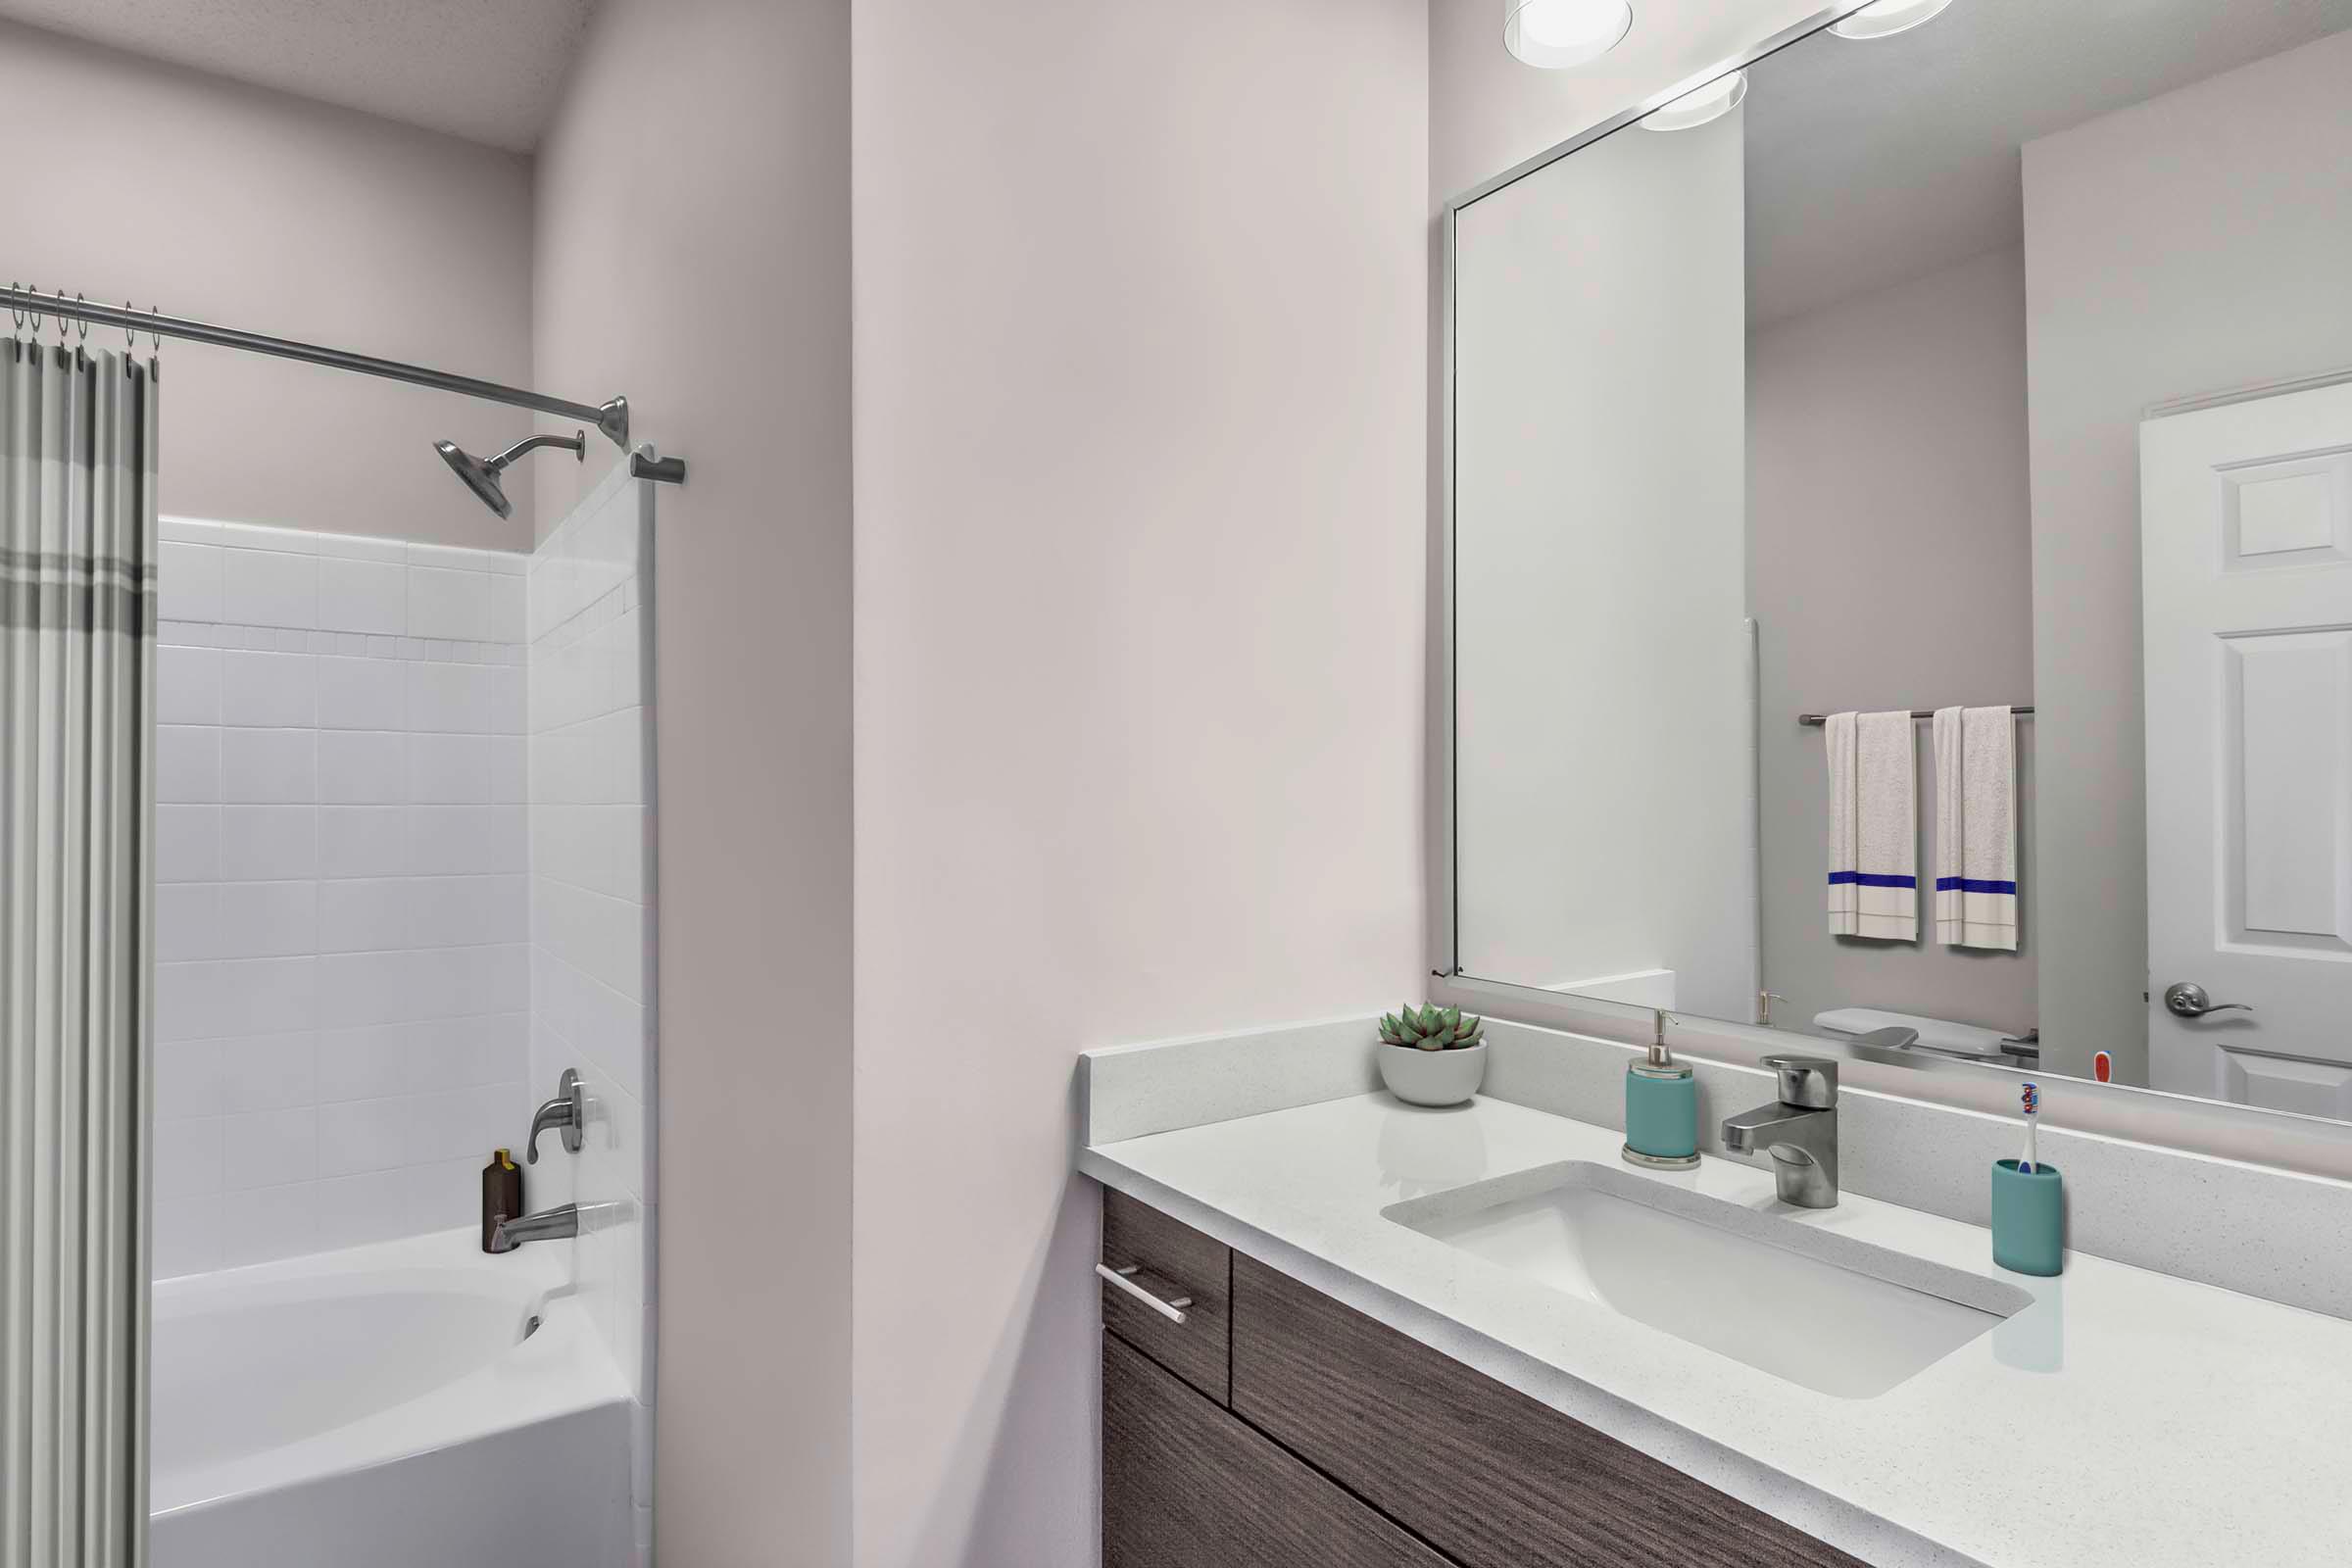 Townhome bathroom with quartz countertop and bathtub with curved shower rod and rainfall showerhead Camden Deerfield Apartments Alpharetta (770)872-6592